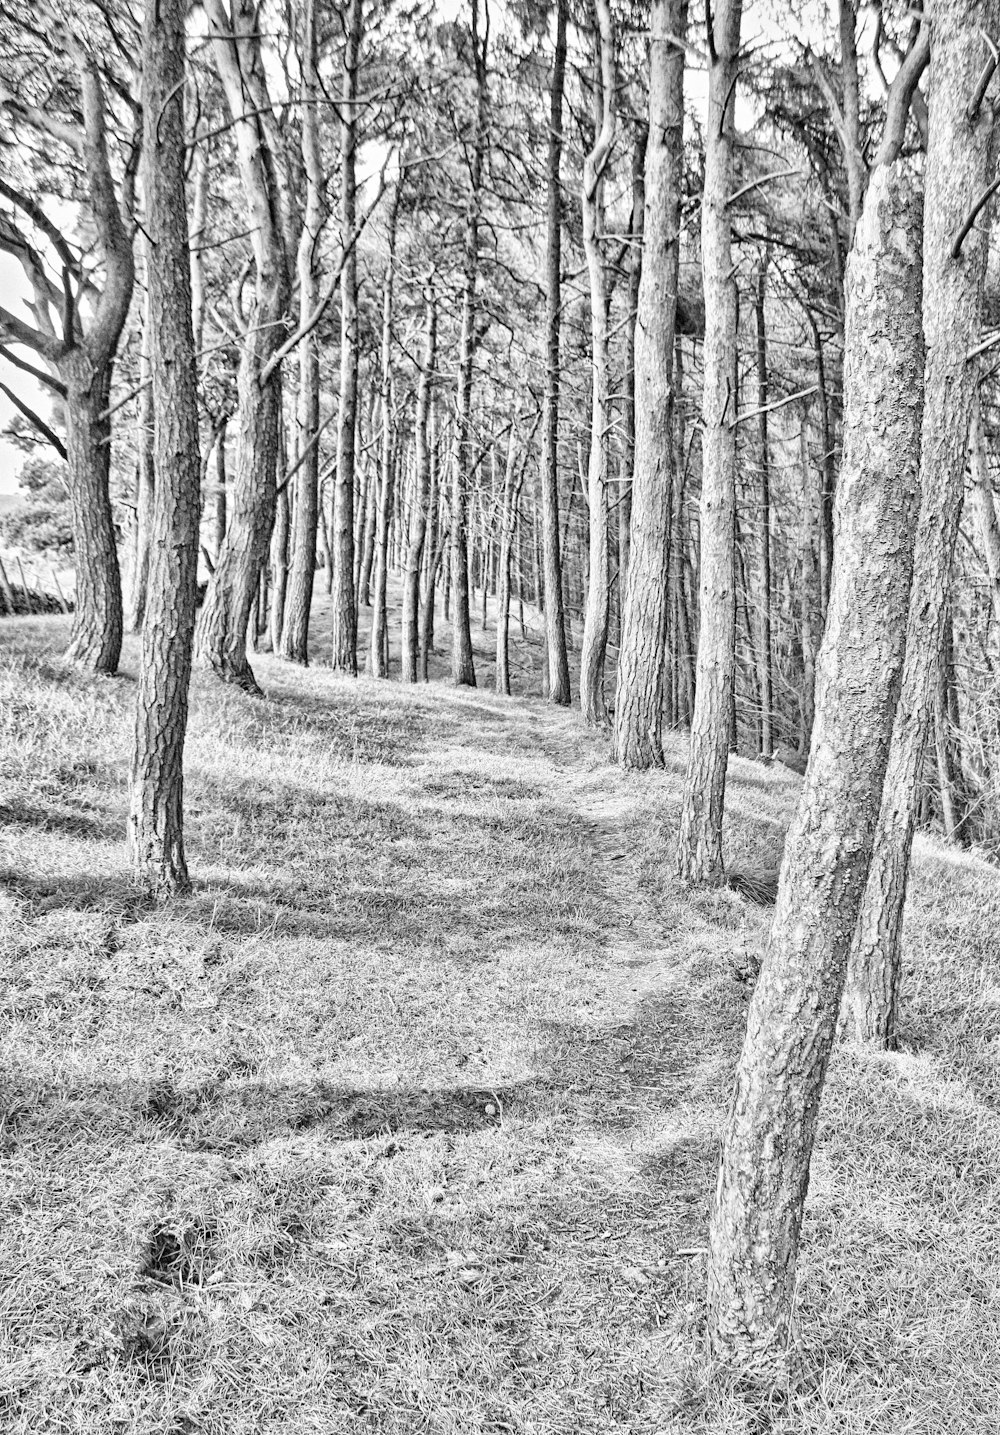 a black and white photo of trees in a forest